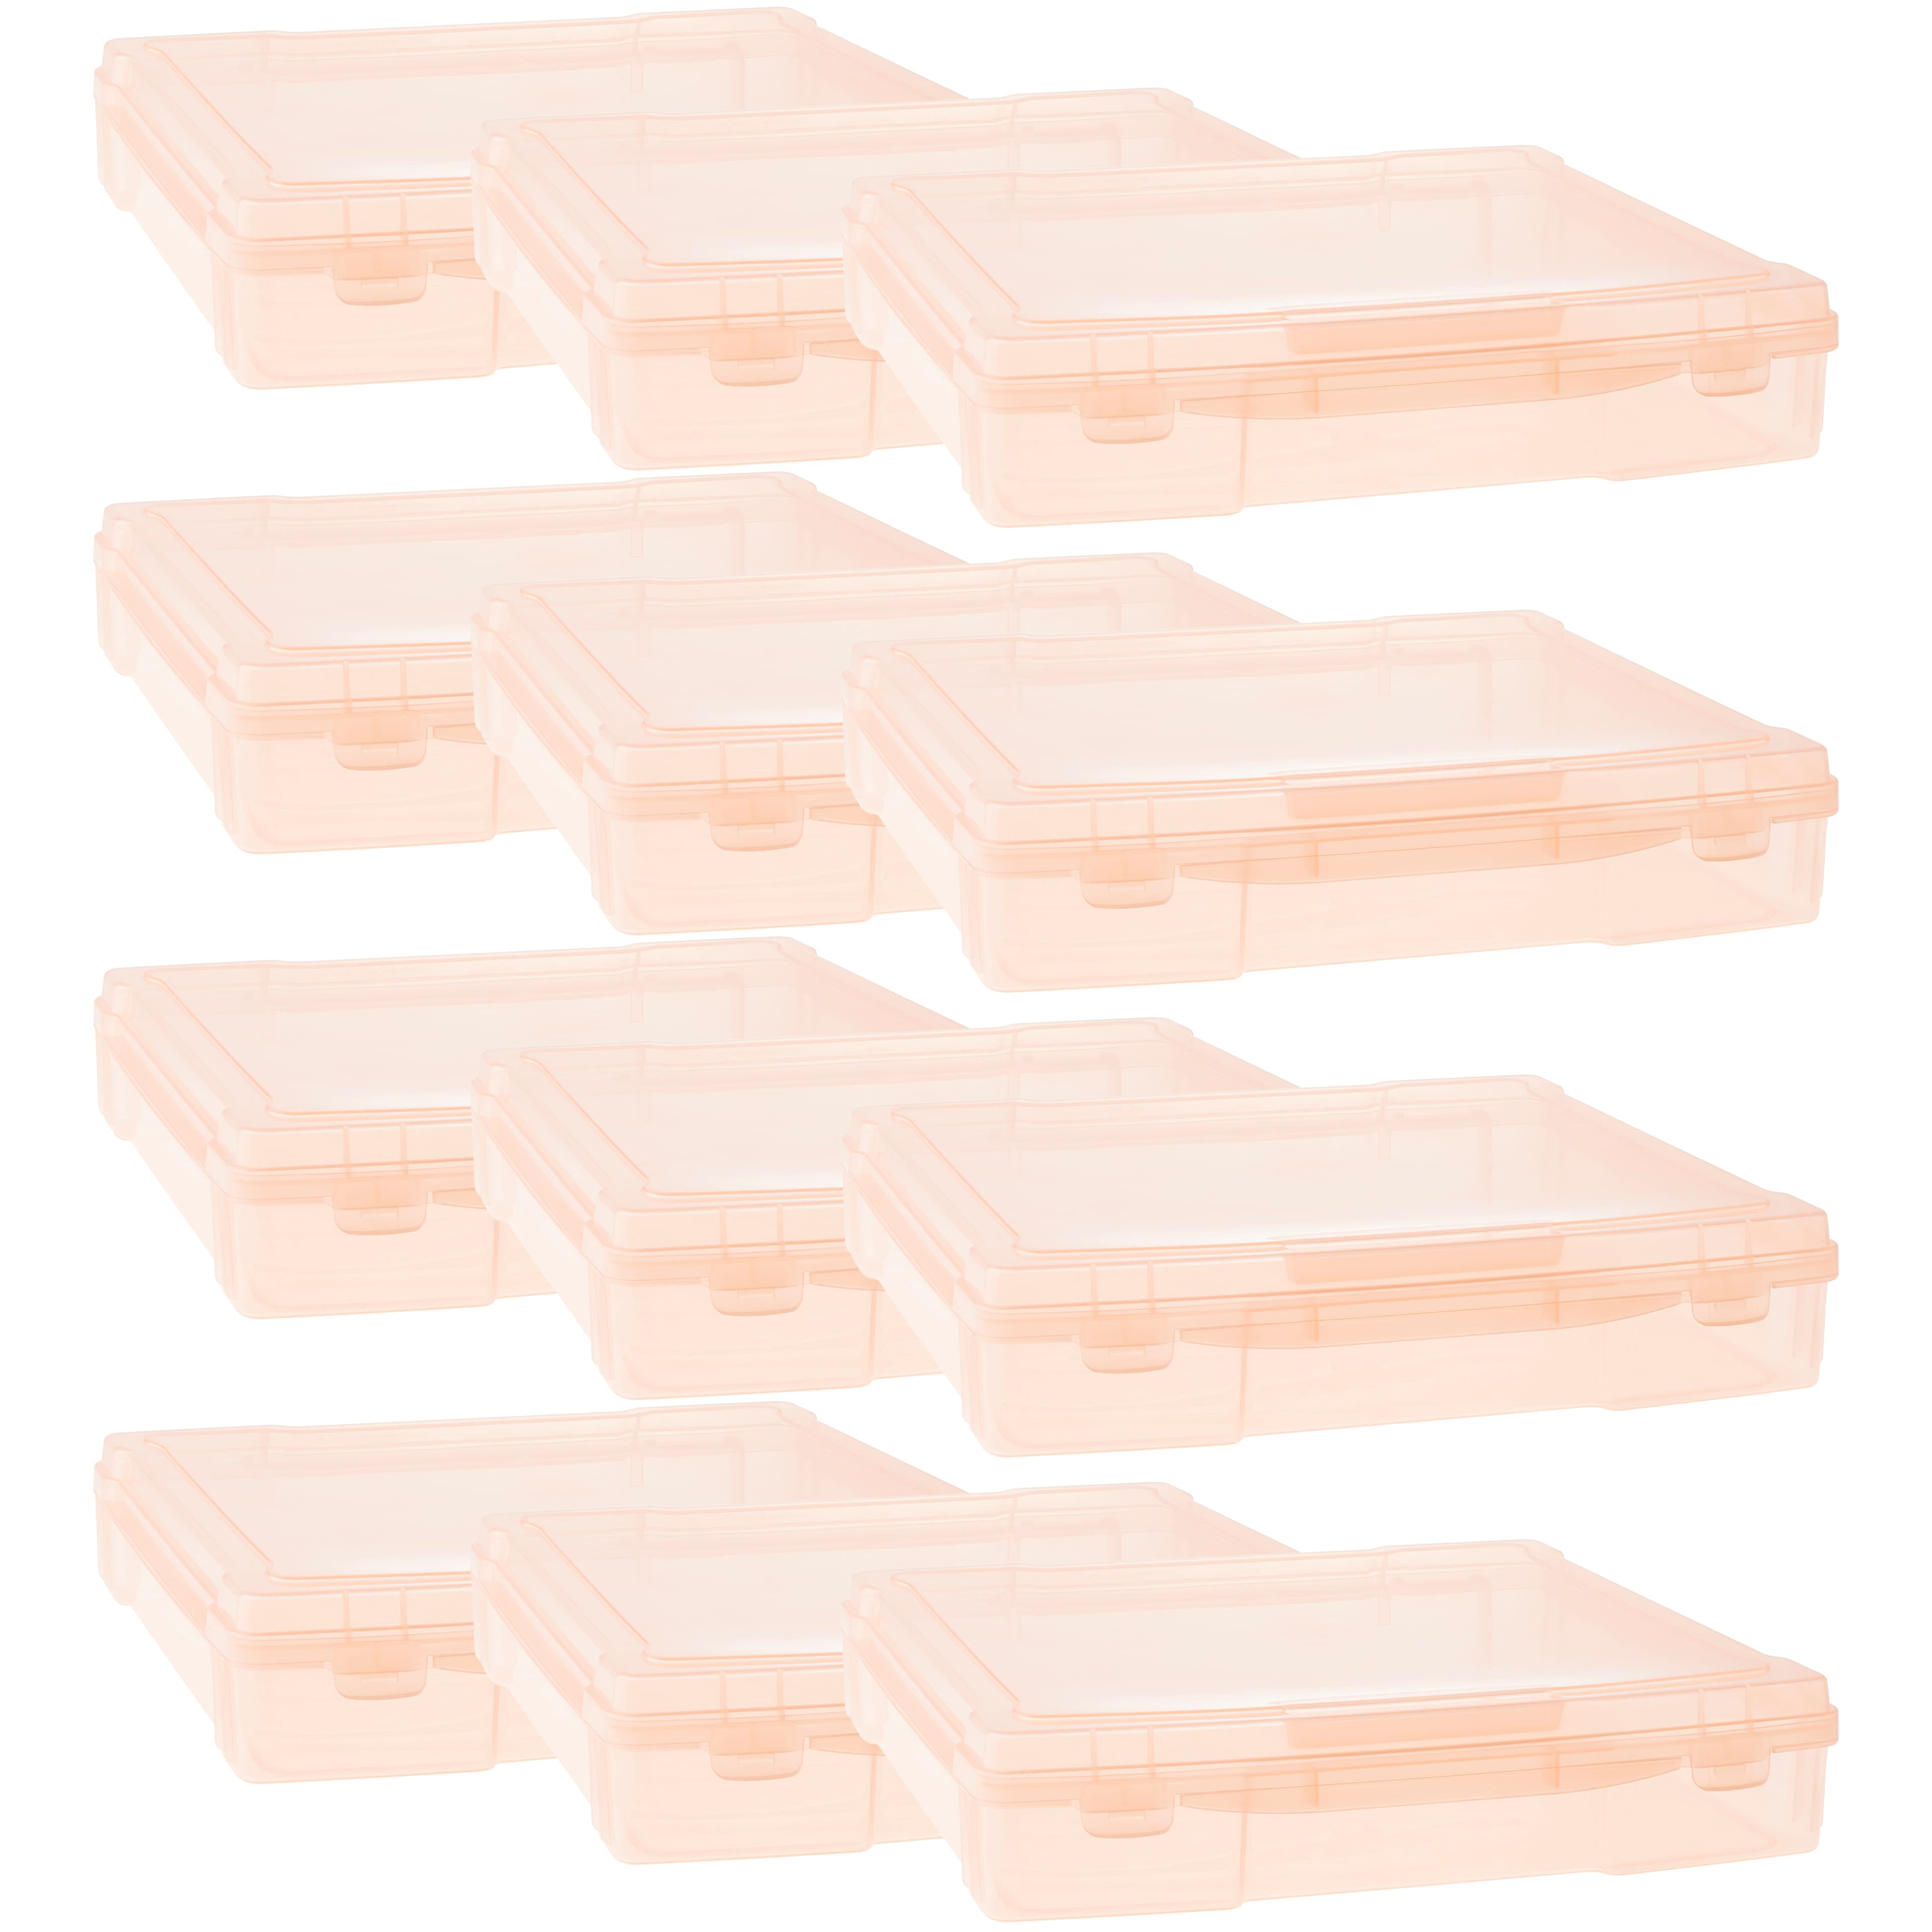 12” x 12” Plastic Scrapbook Storage Case by Simply Tidy - Portable